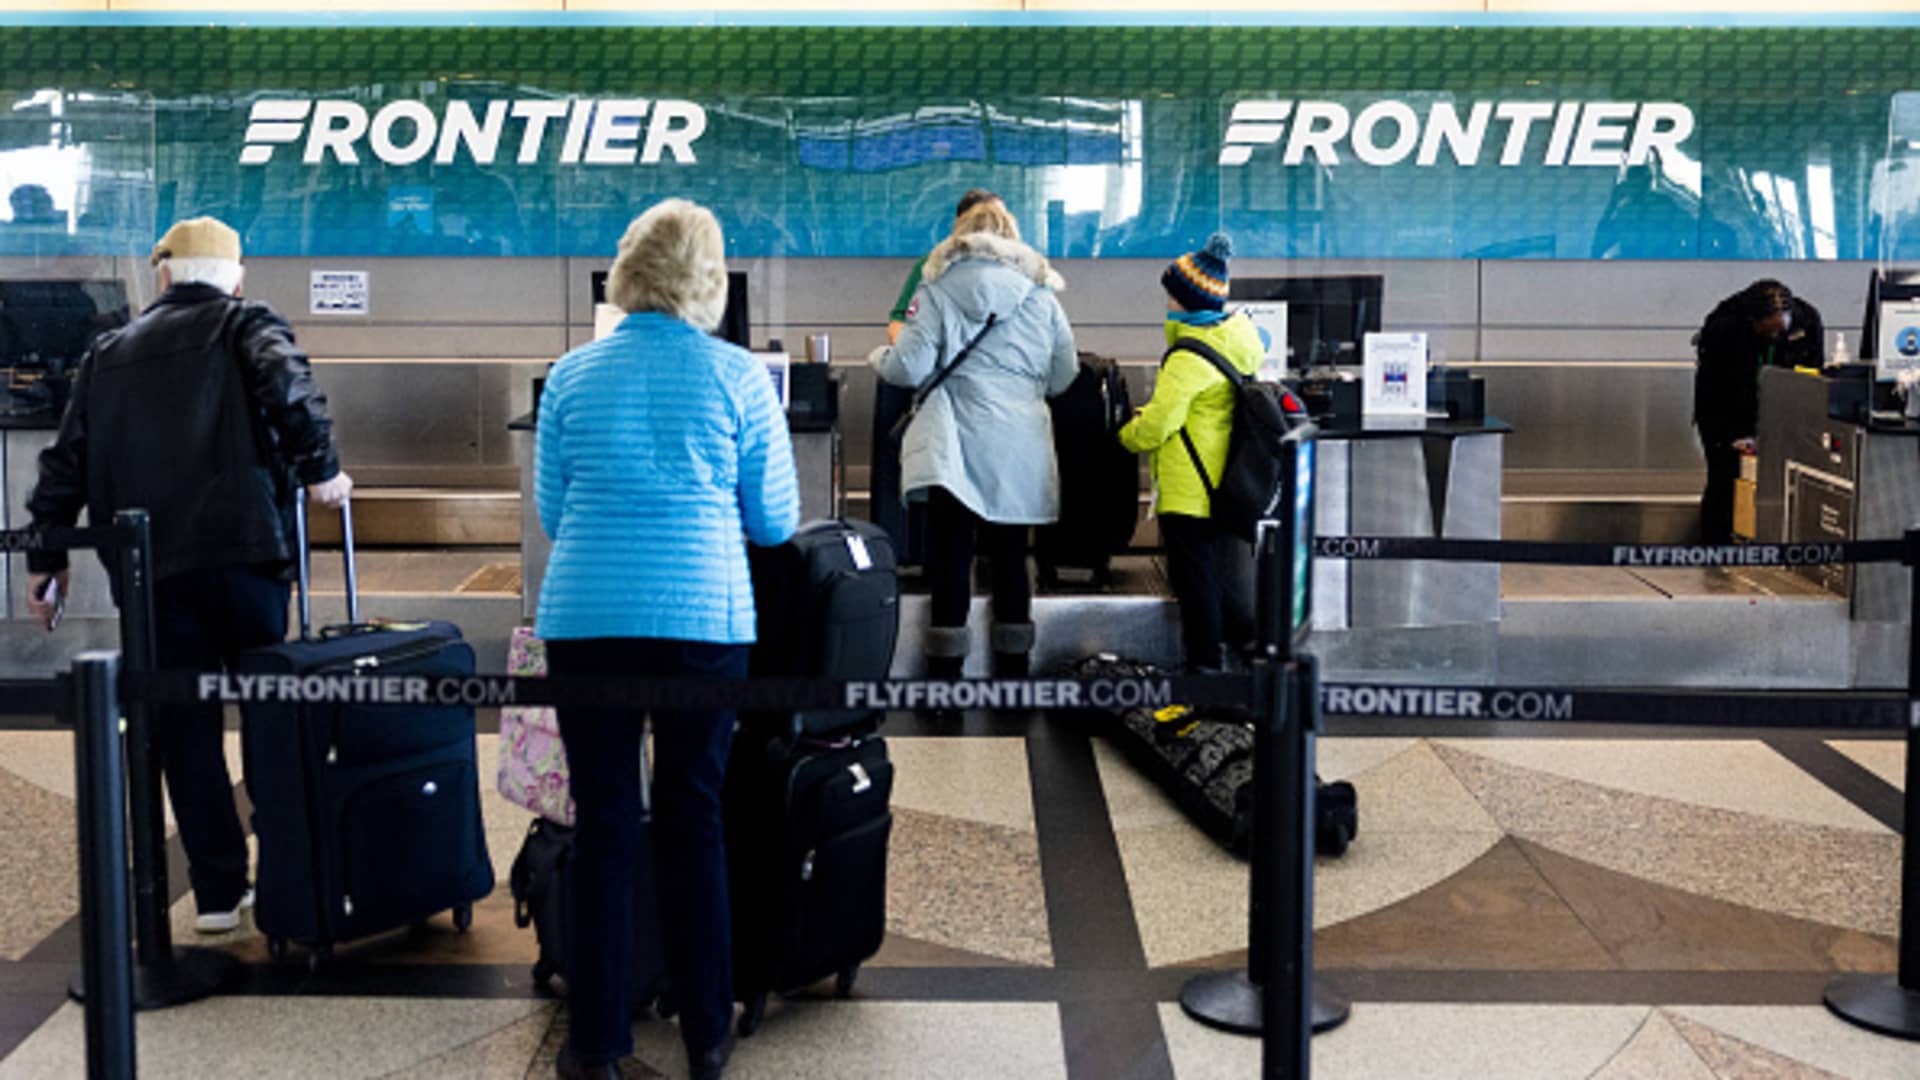 Even discount airfares are on the rise thanks to higher fuel costs and strong demand, Frontier CEO says